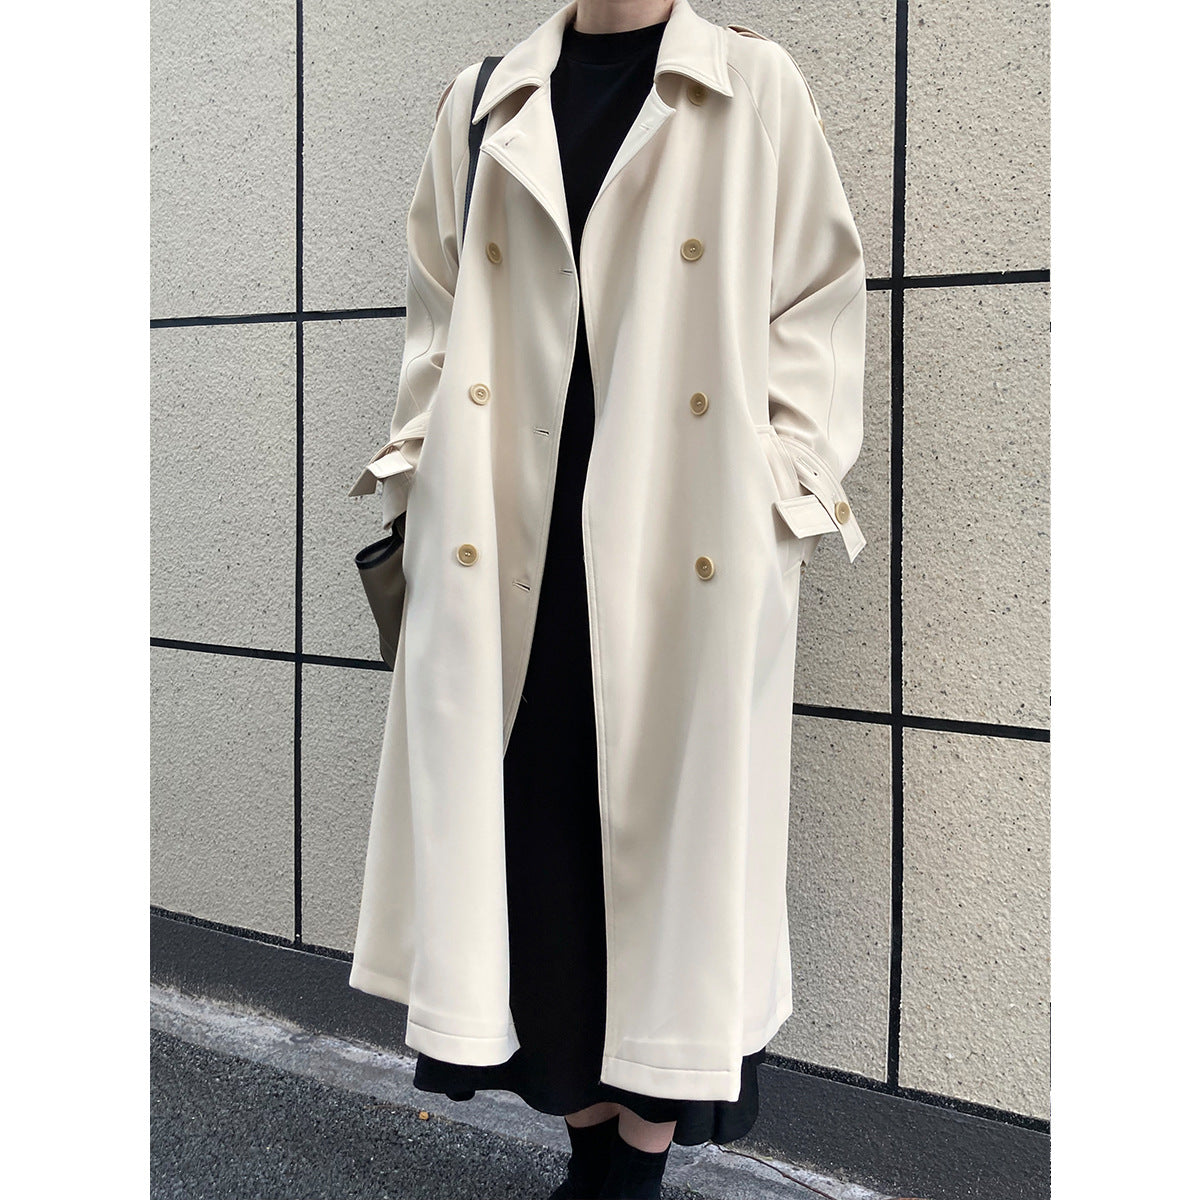 Fashion Fall Wind Break Long Overcoats for Women-Outerwear-Ivory-S-Free Shipping at meselling99